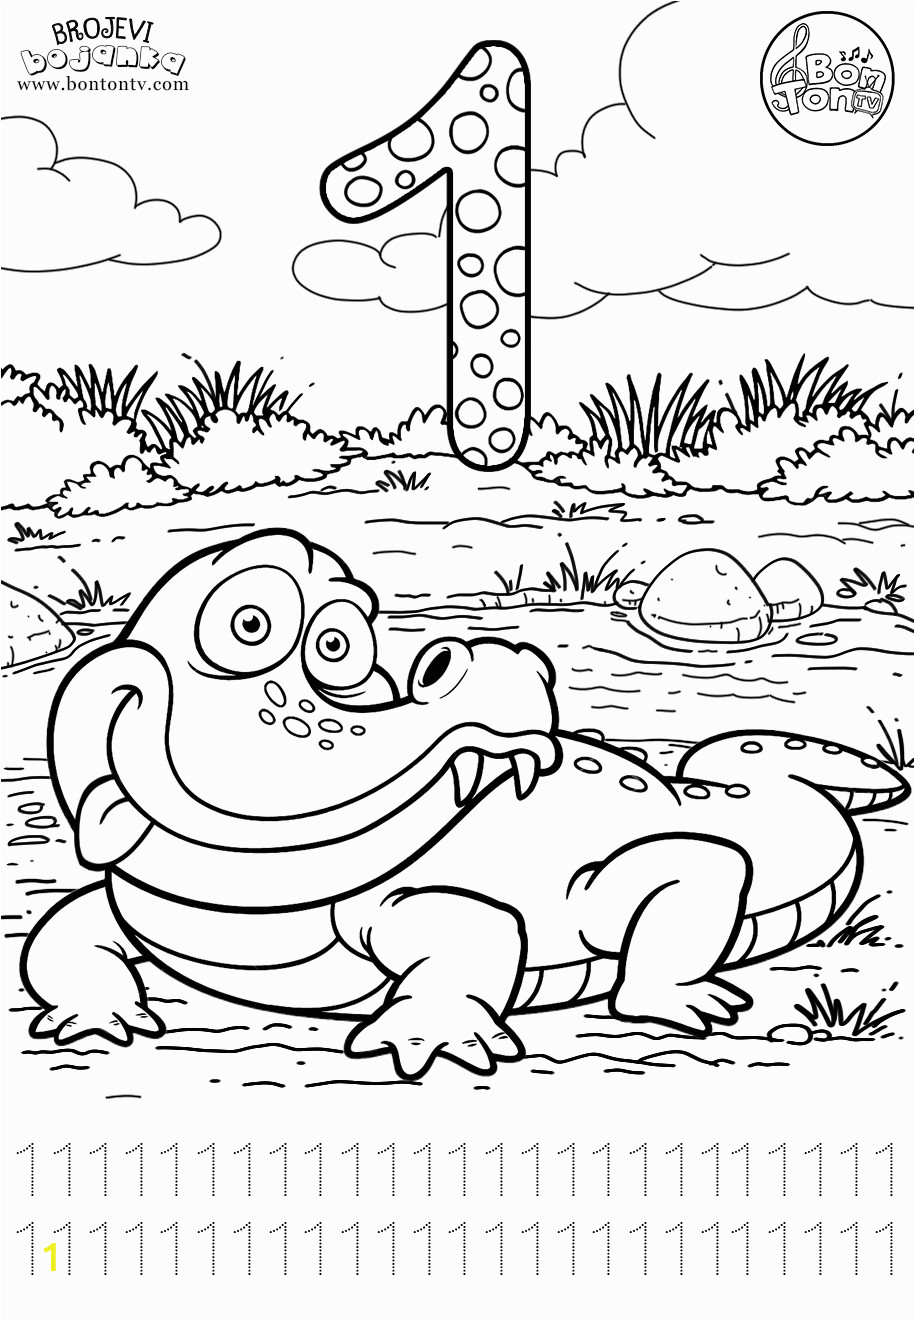 Coloring Pages Printables with Numbers Number 1 Preschool Printables Worksheets Coloring Pages